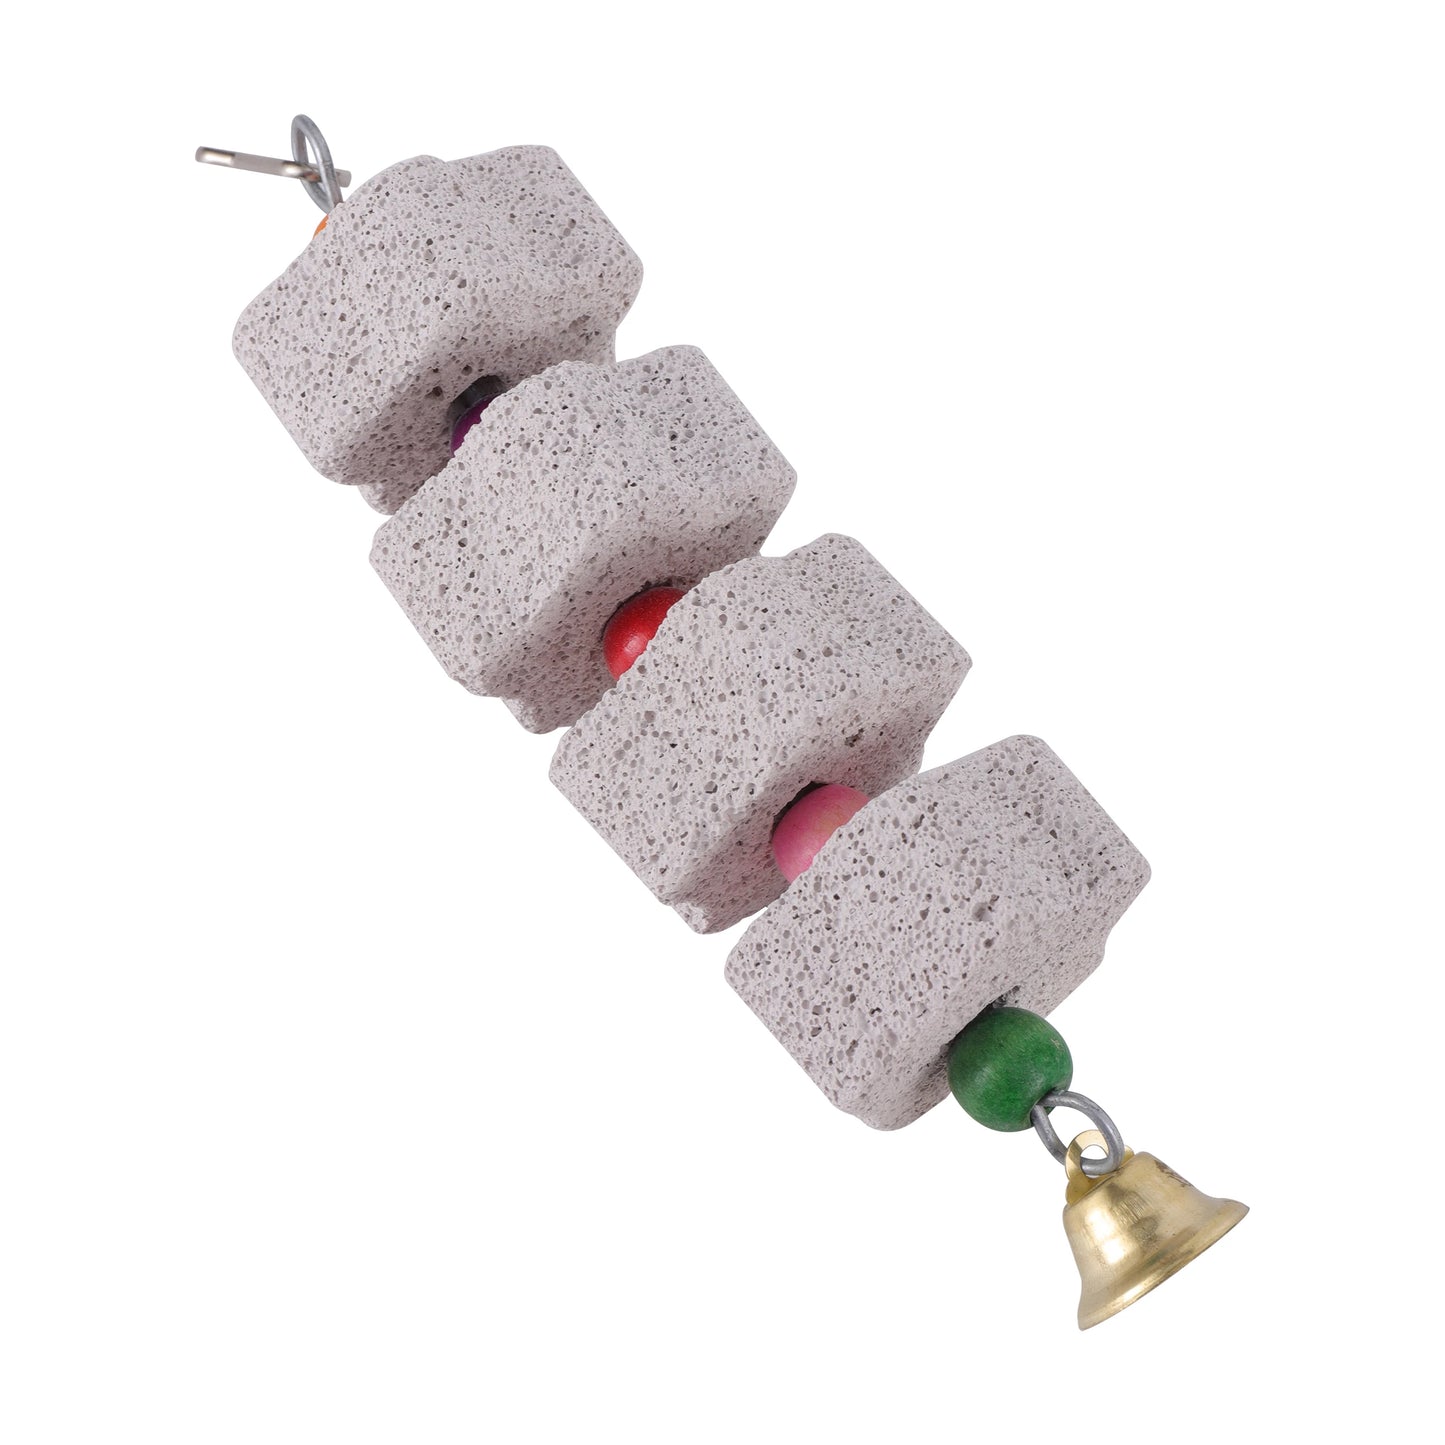 FloraStone Hang & Grind: Flower-Shaped Mineral Grinding Stone Toy for Parrots and Parakeets